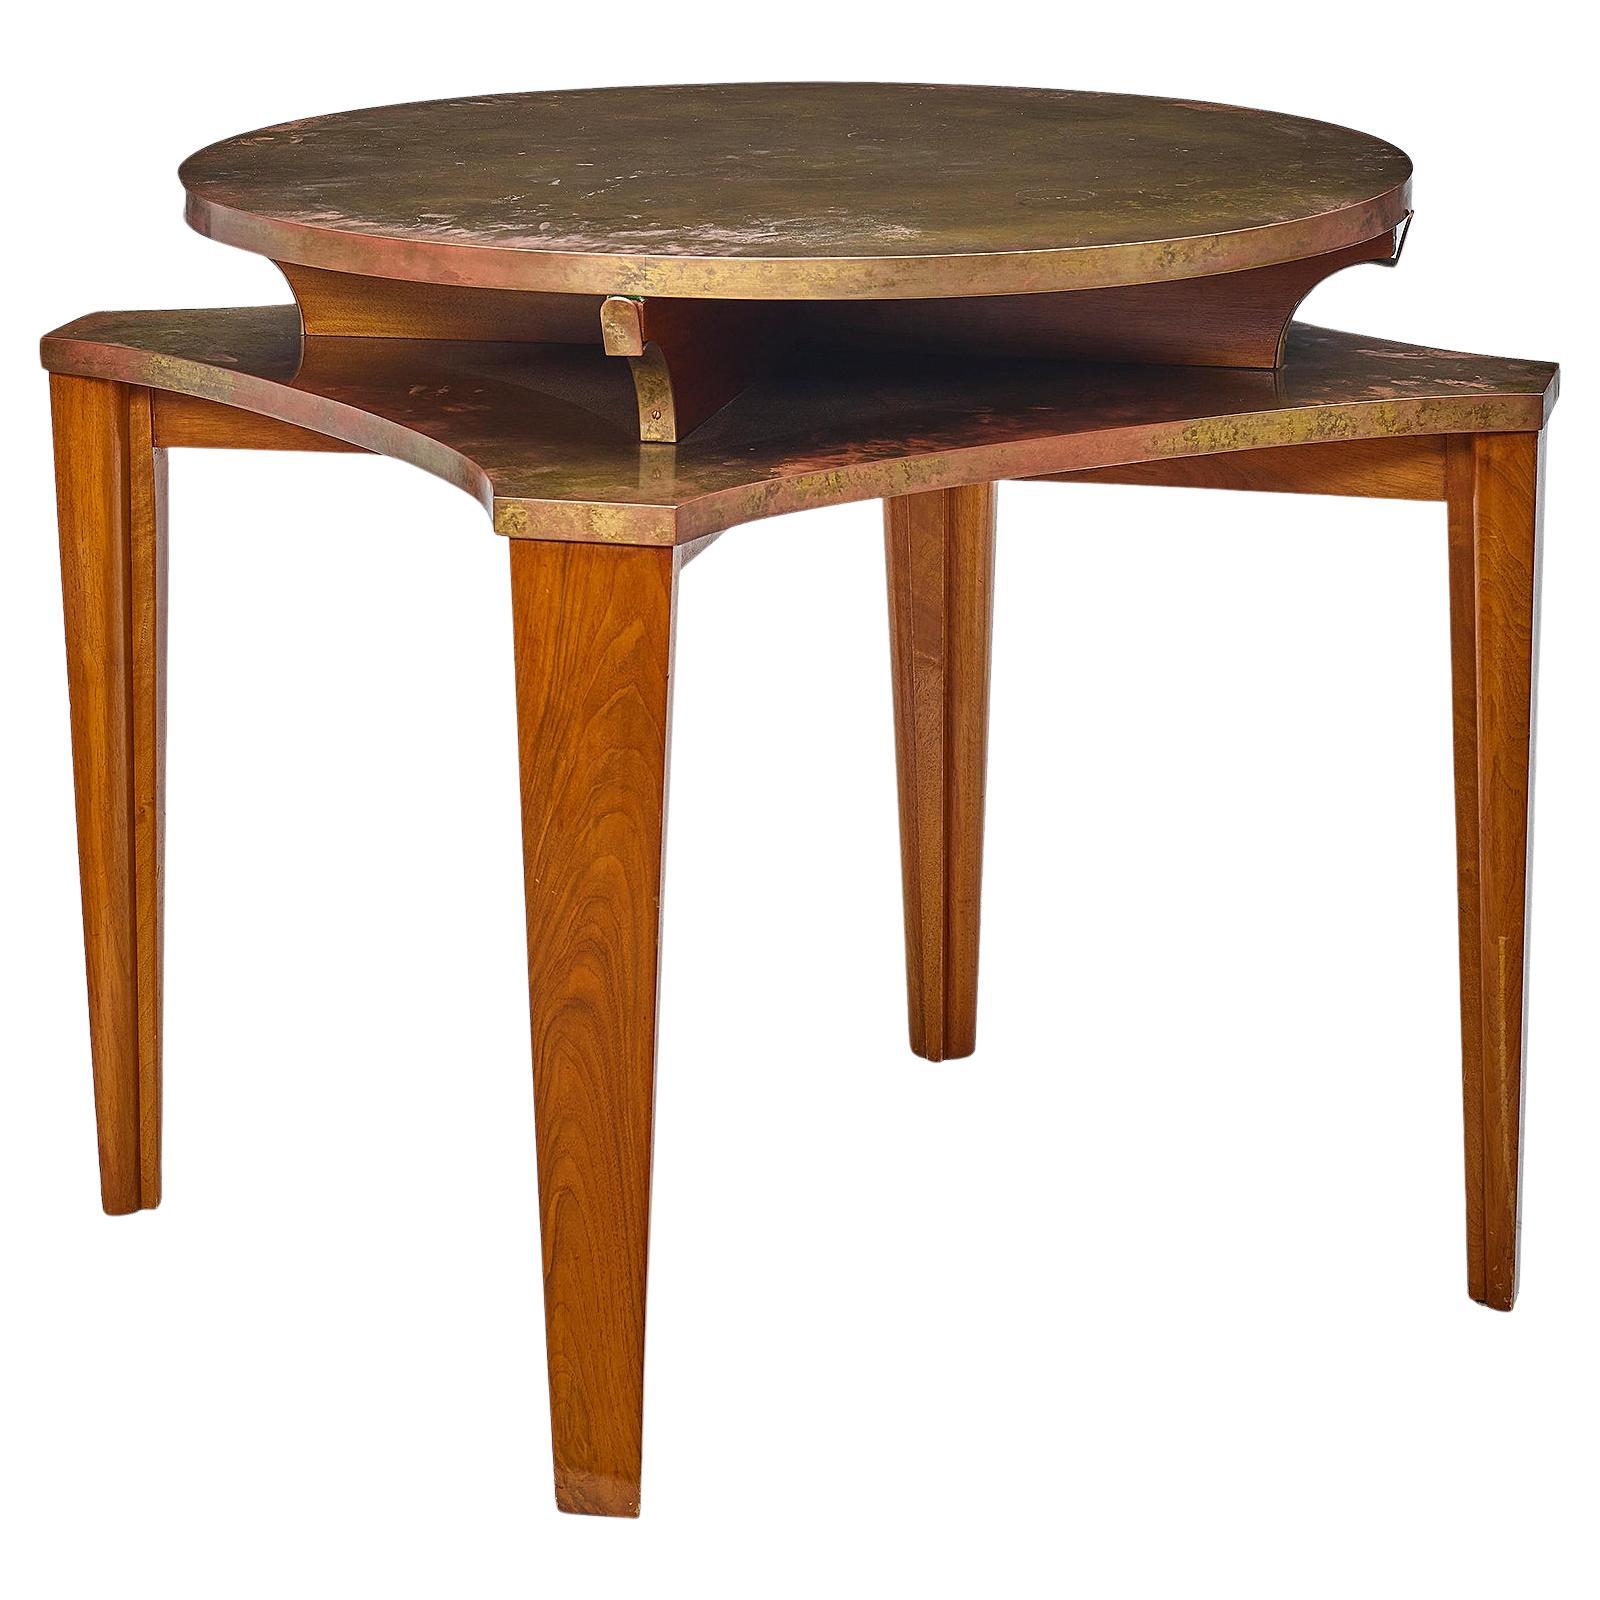 Eugene PRINTZ - Rare game table with a oxidized brass top. For Sale